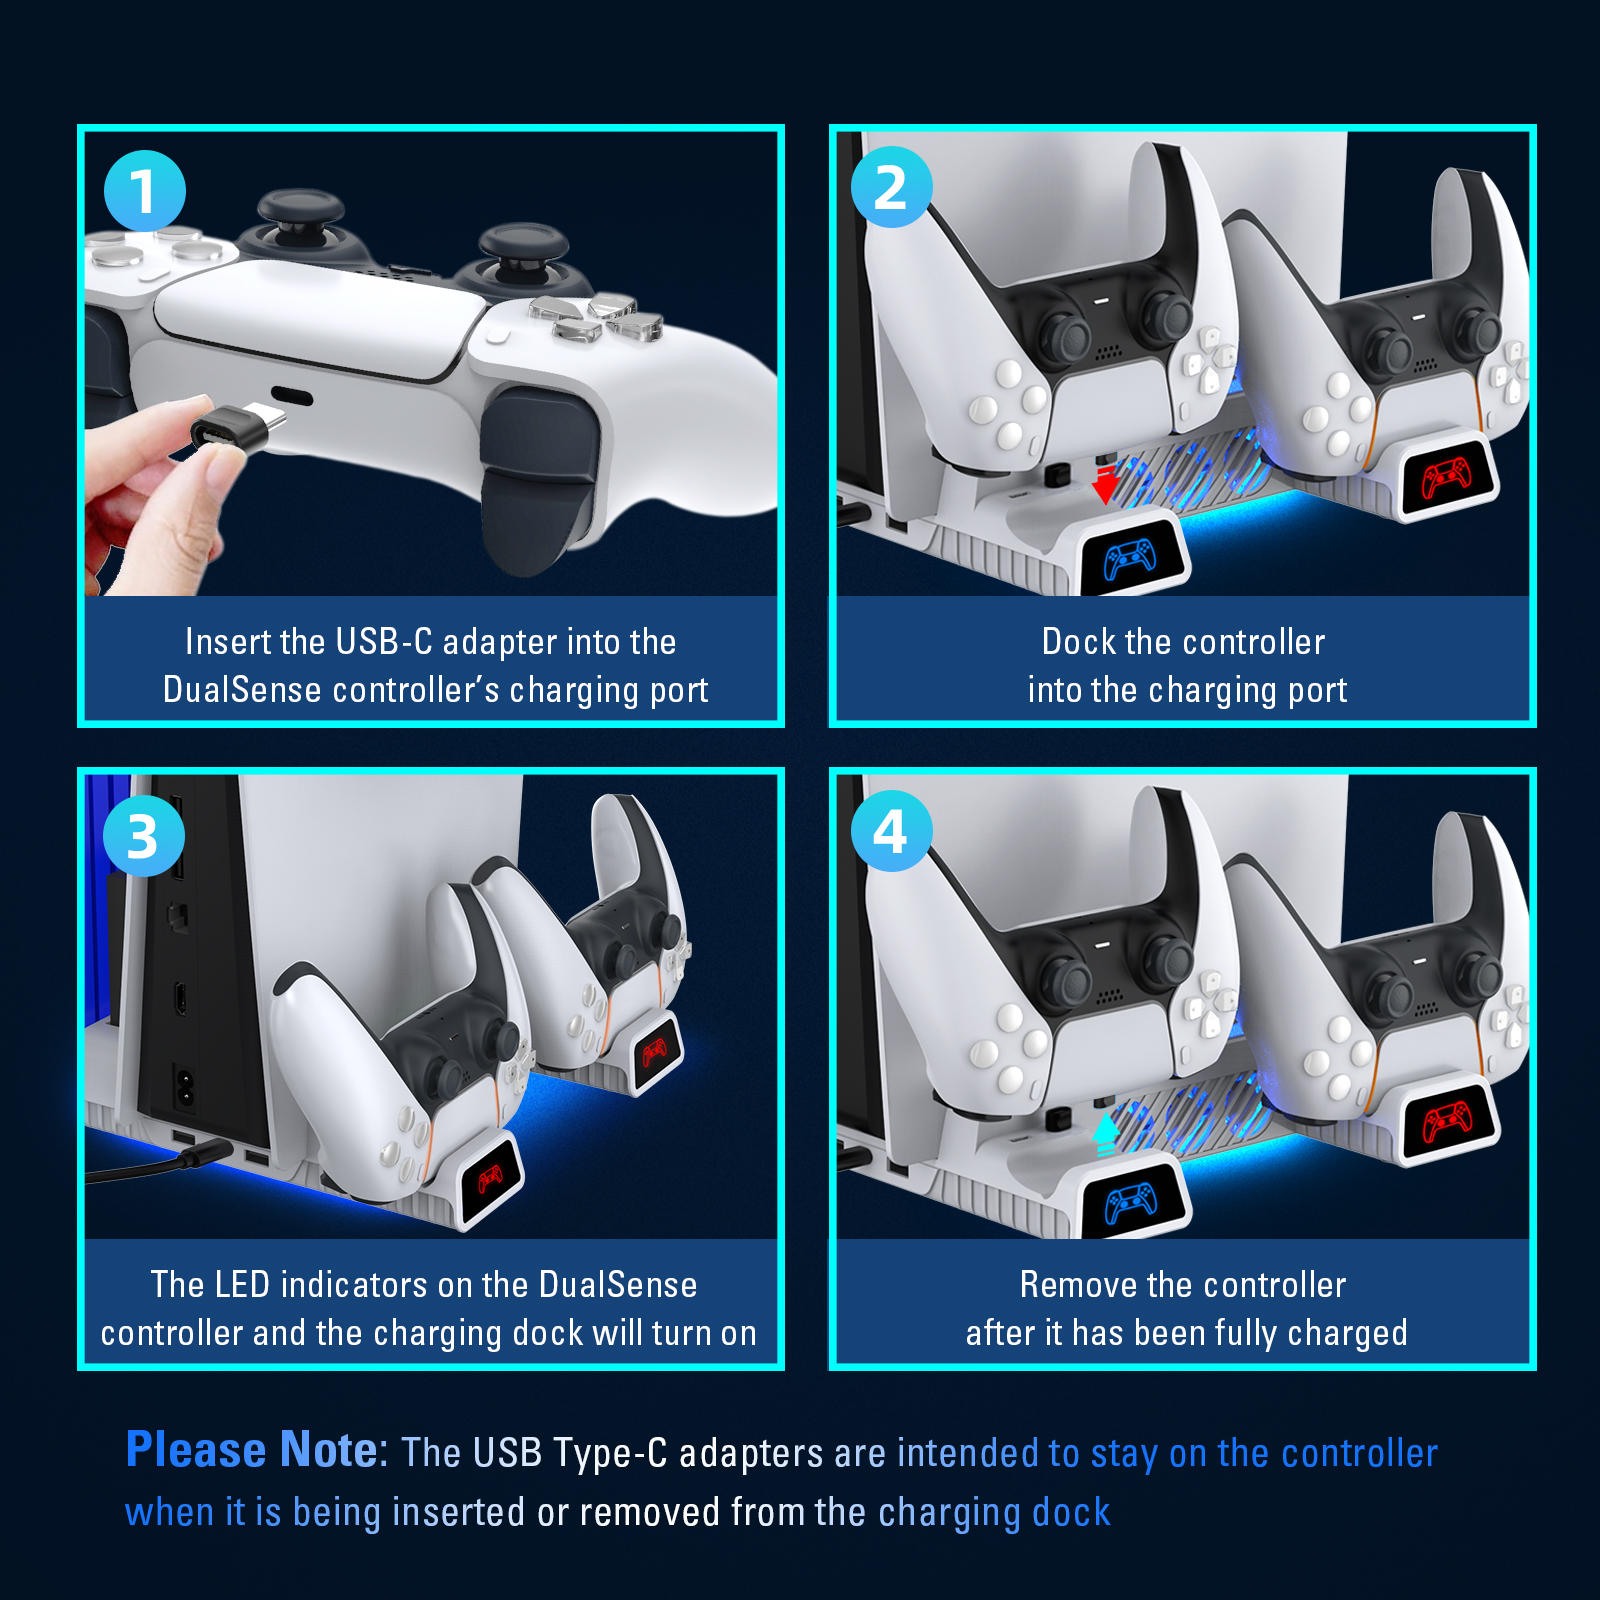 User Guide for Charging Station: PS5 controller charging on the station with USB-C adapter